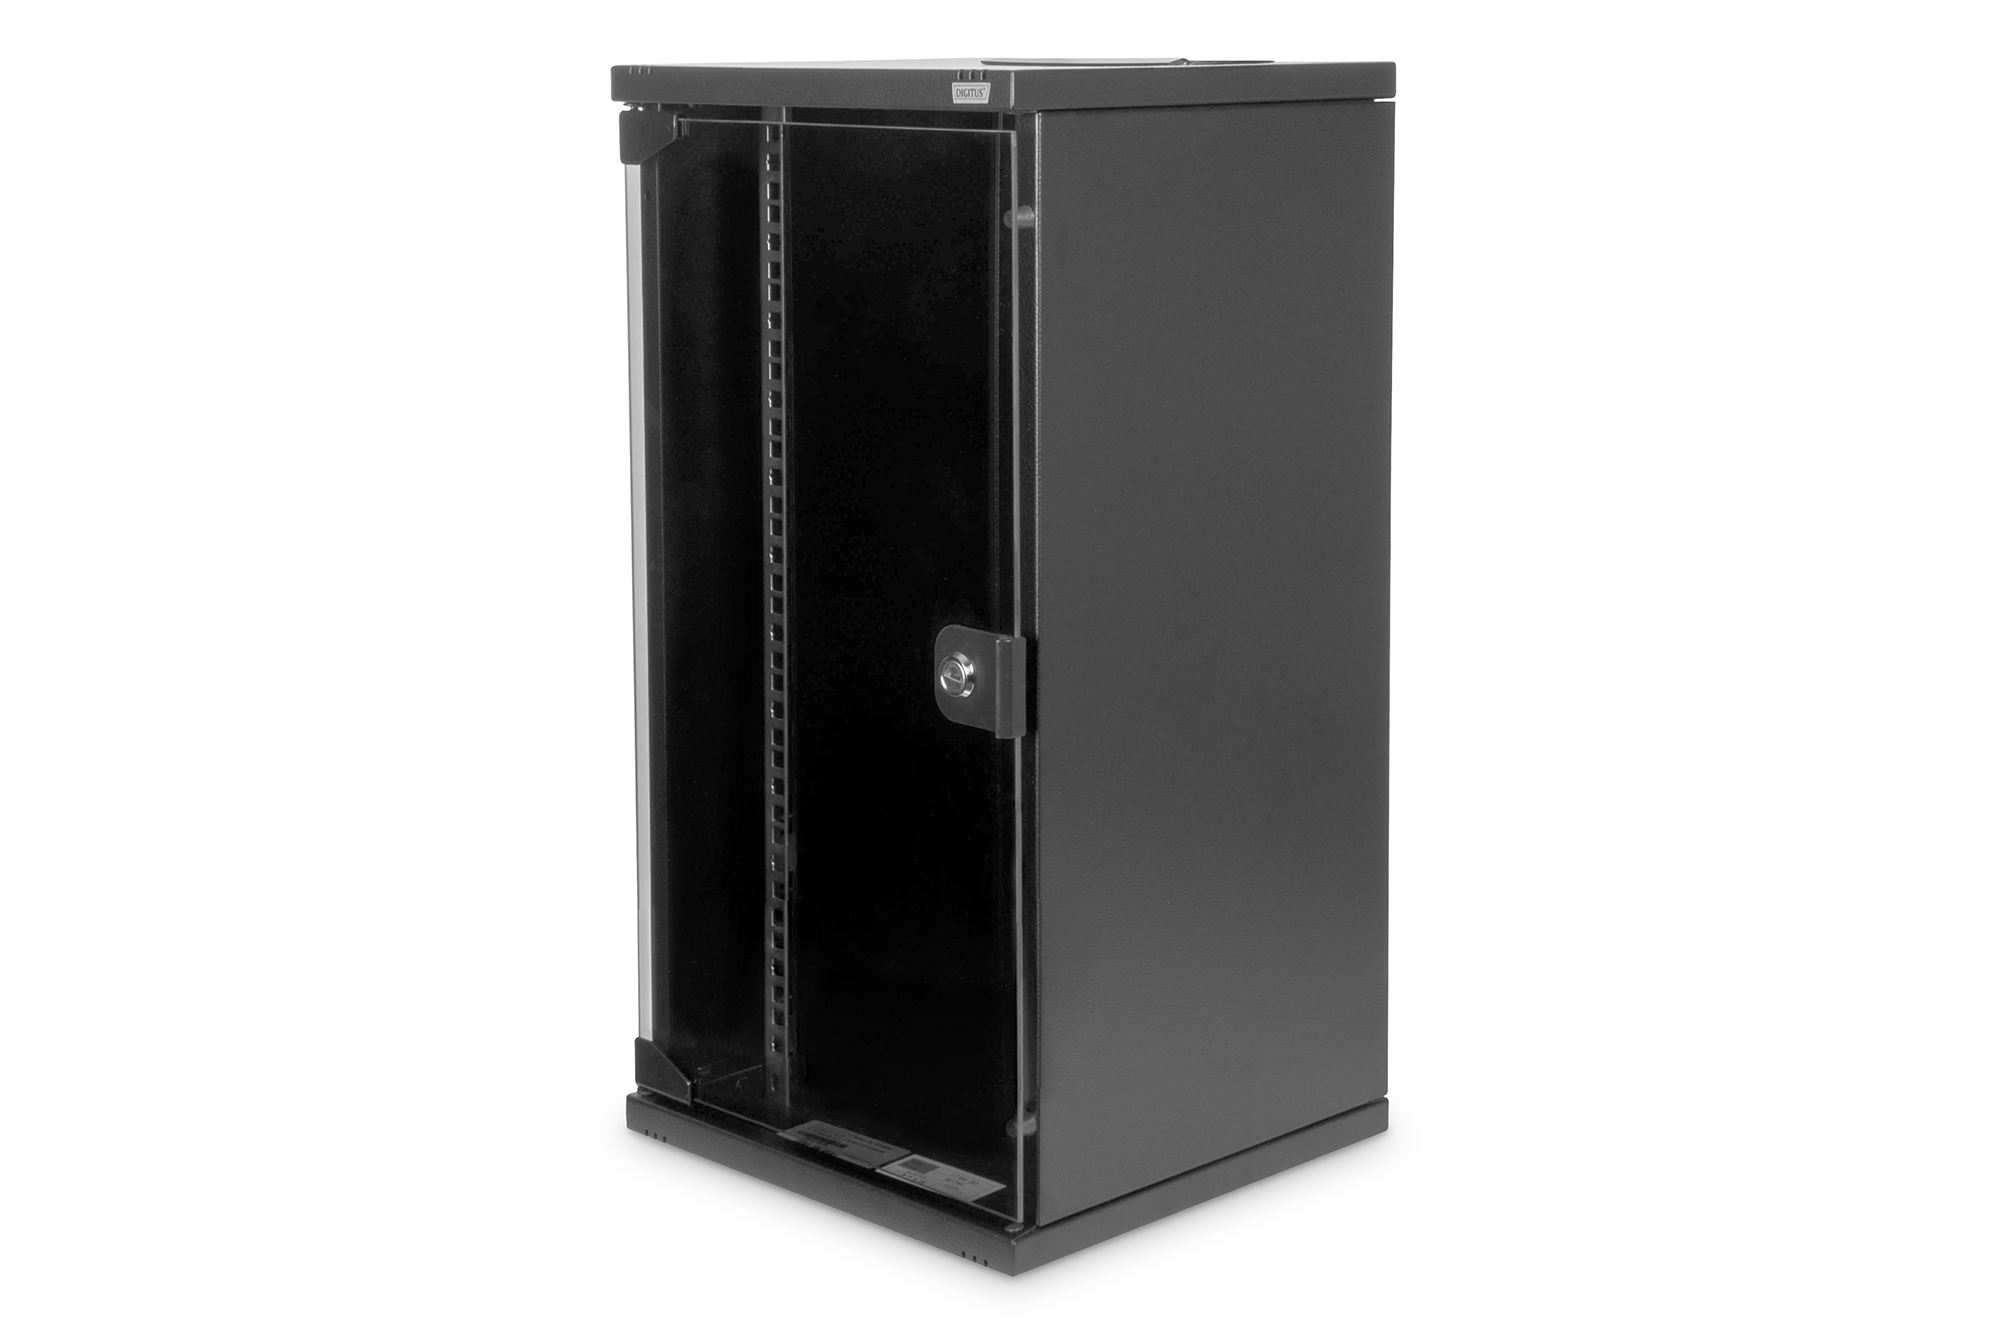 Photos - Server Component Digitus Wall Mounting Cabinet 254 mm  - 312x300 mm (WxD) DN-10-12U-B (10")